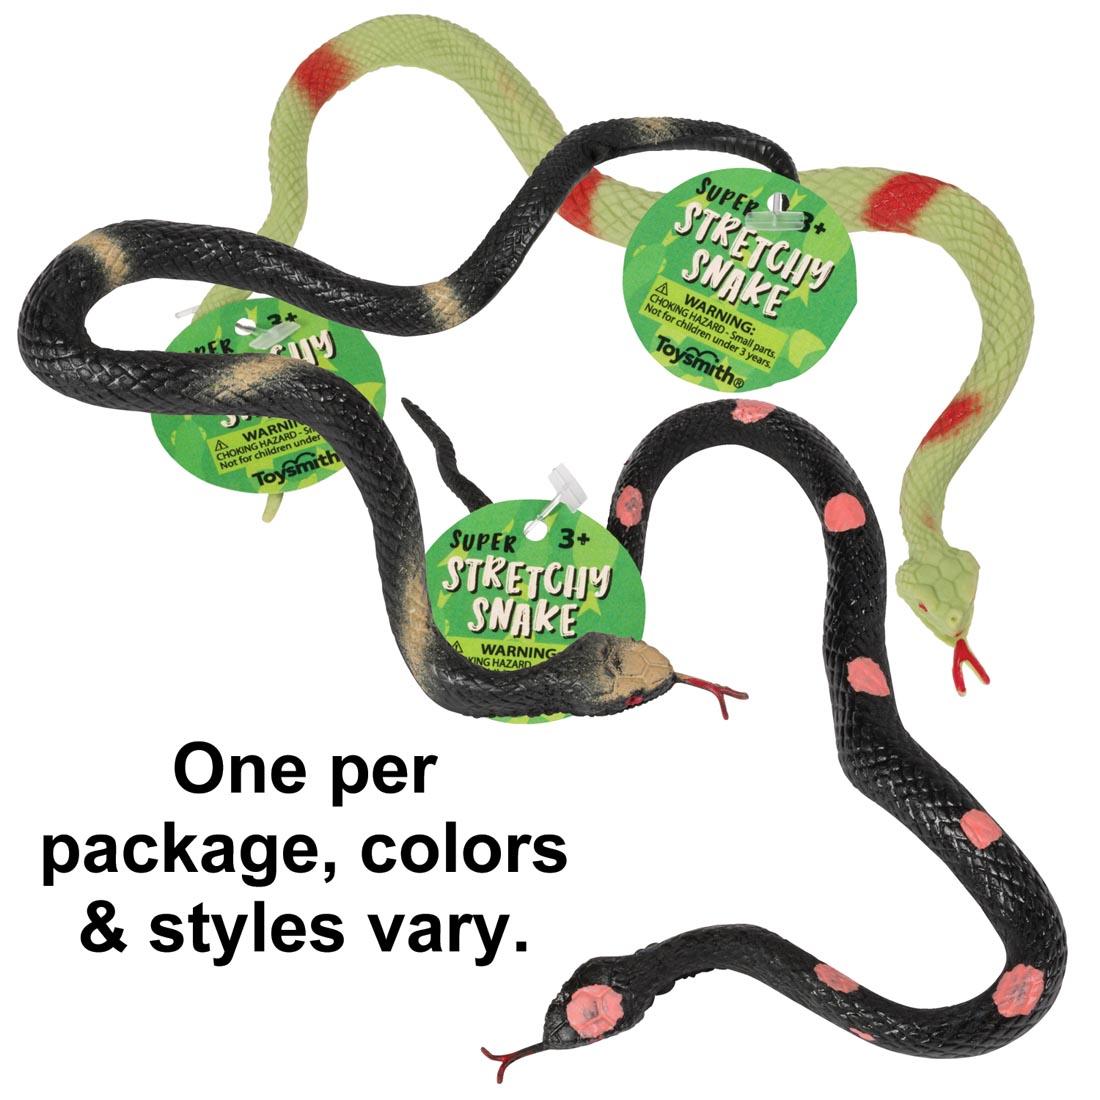 Two Super Stretchy Snakes with the text One per package, colors & styles vary